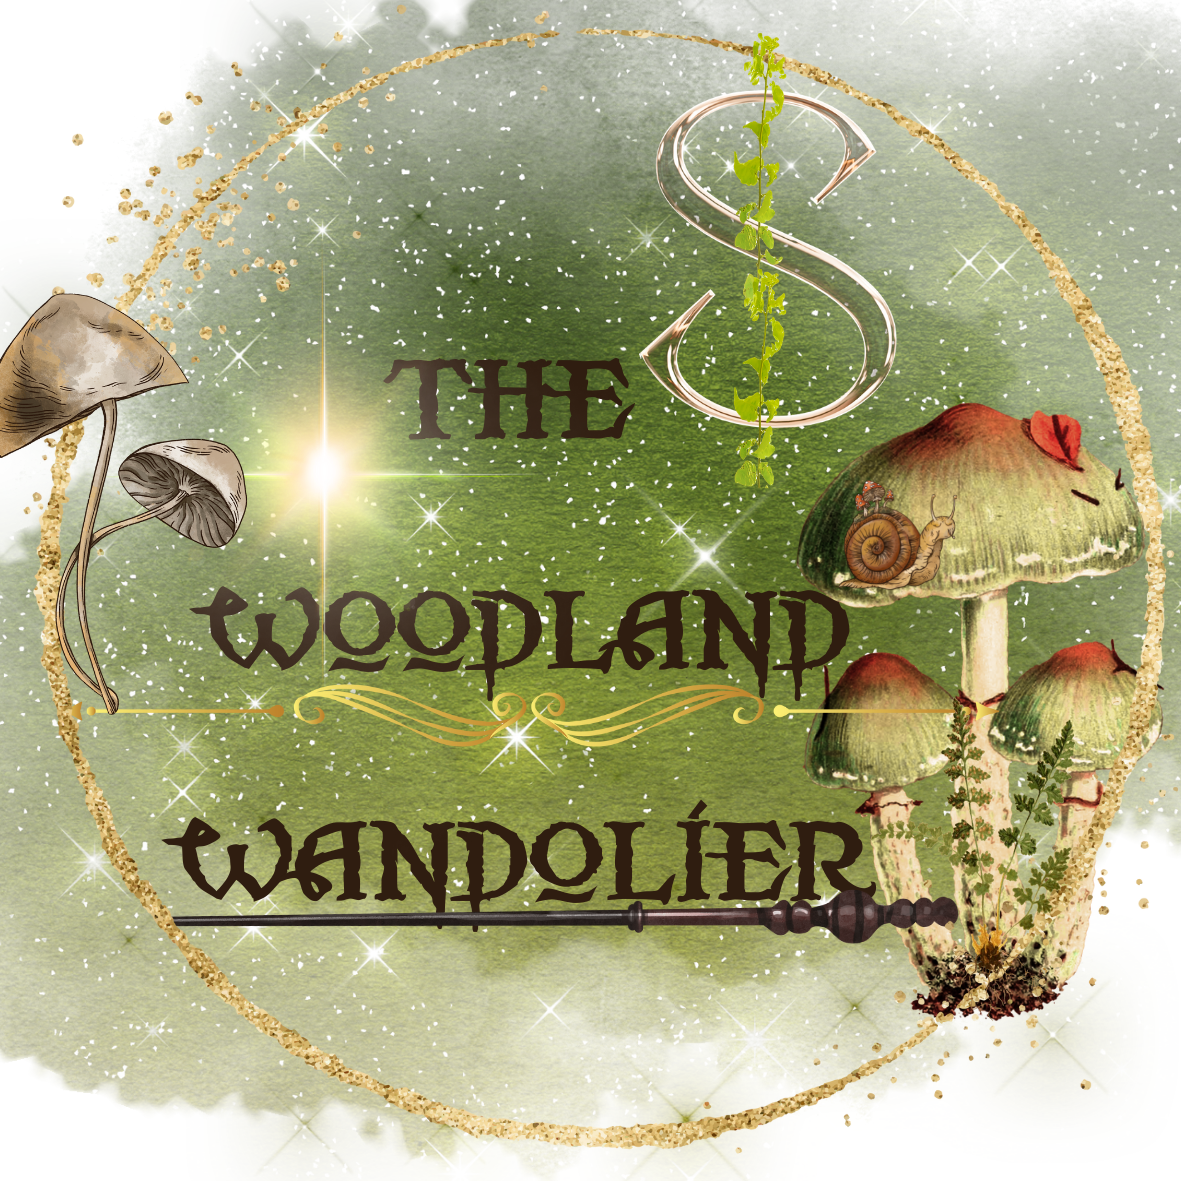 Woodland Gift Cards & Brand Vouchers Offers Online | WINDS App